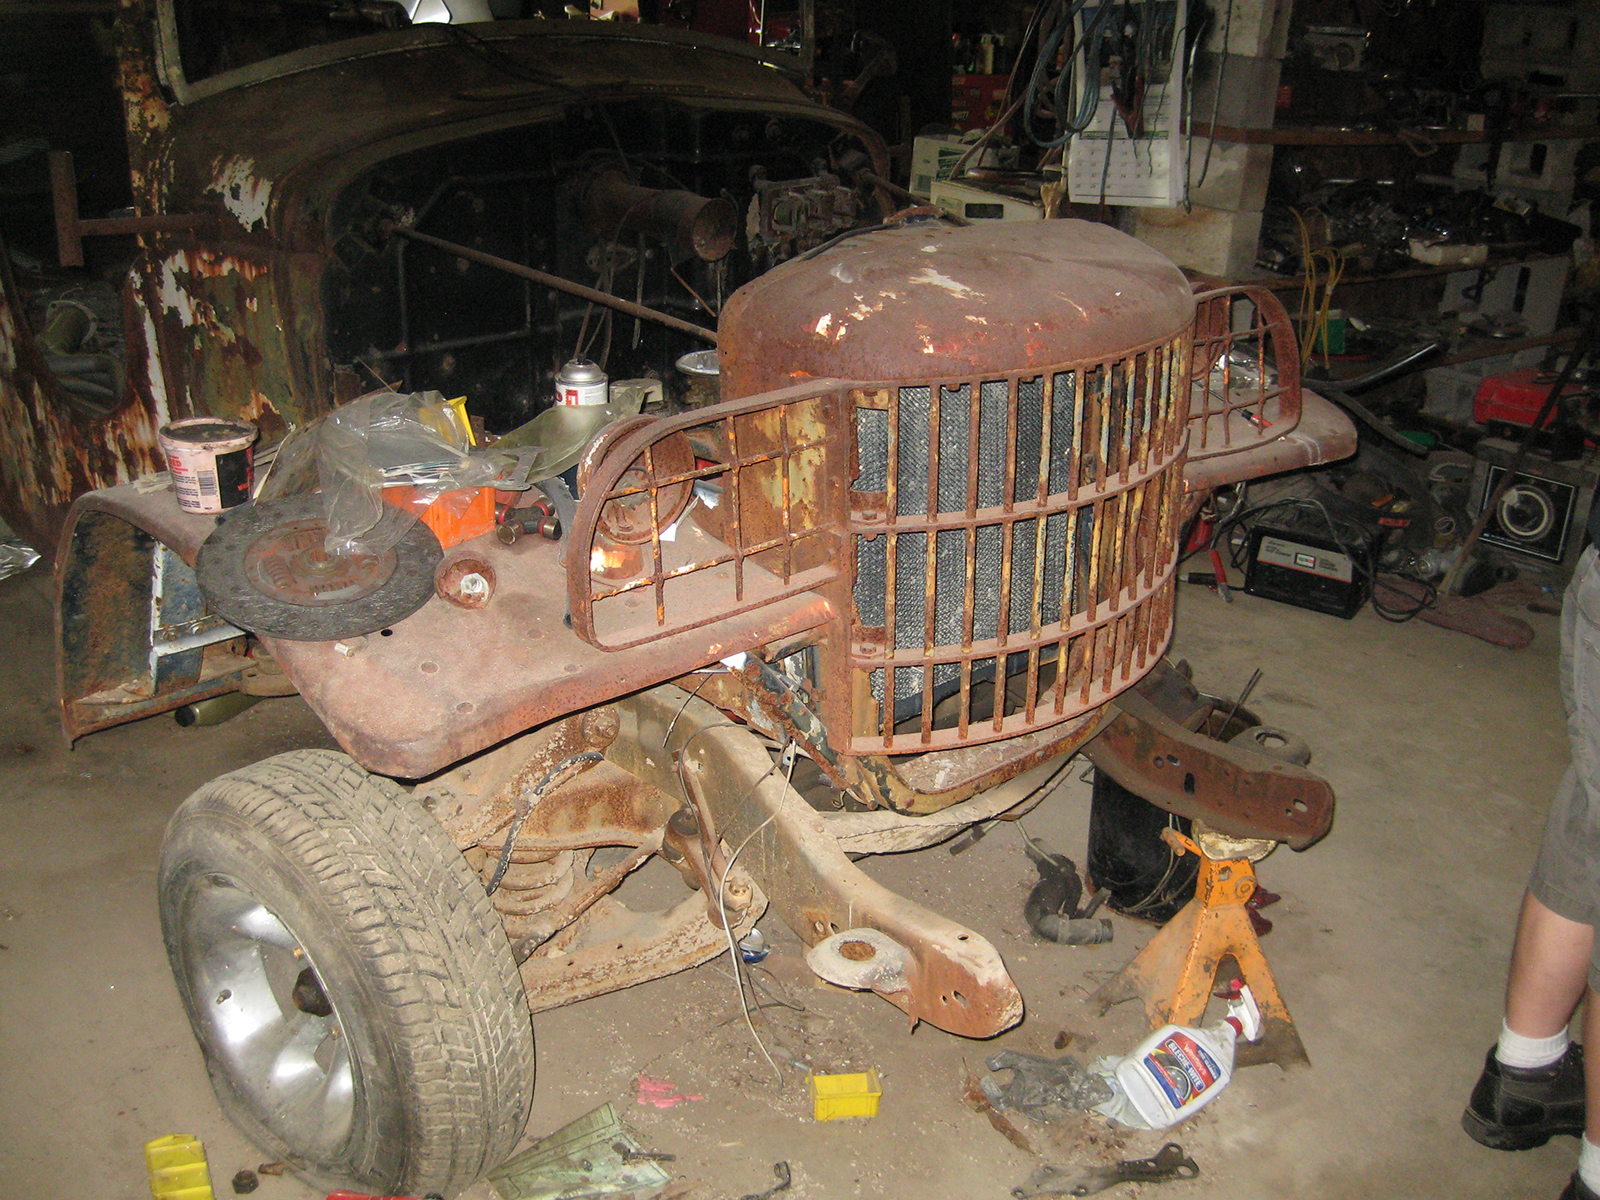 Extremely rusted front grill and body of a 1941 Army Command Car.